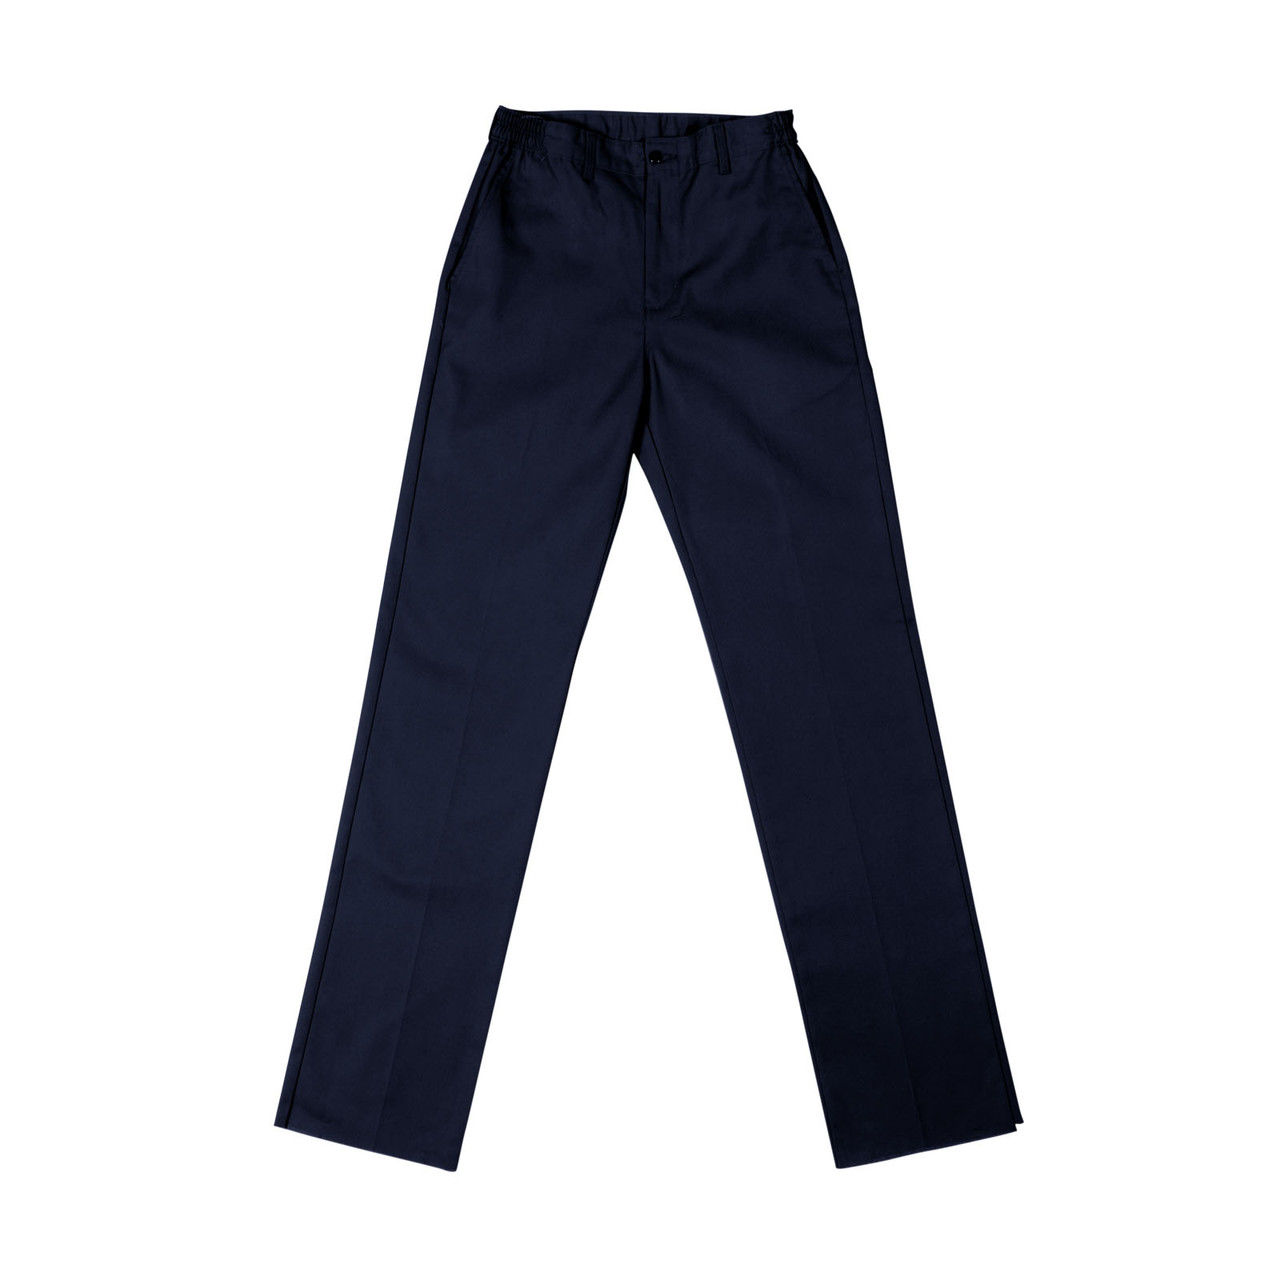 What materials make up the 7.25 oz twill in the P26 women's navy blue work pants?